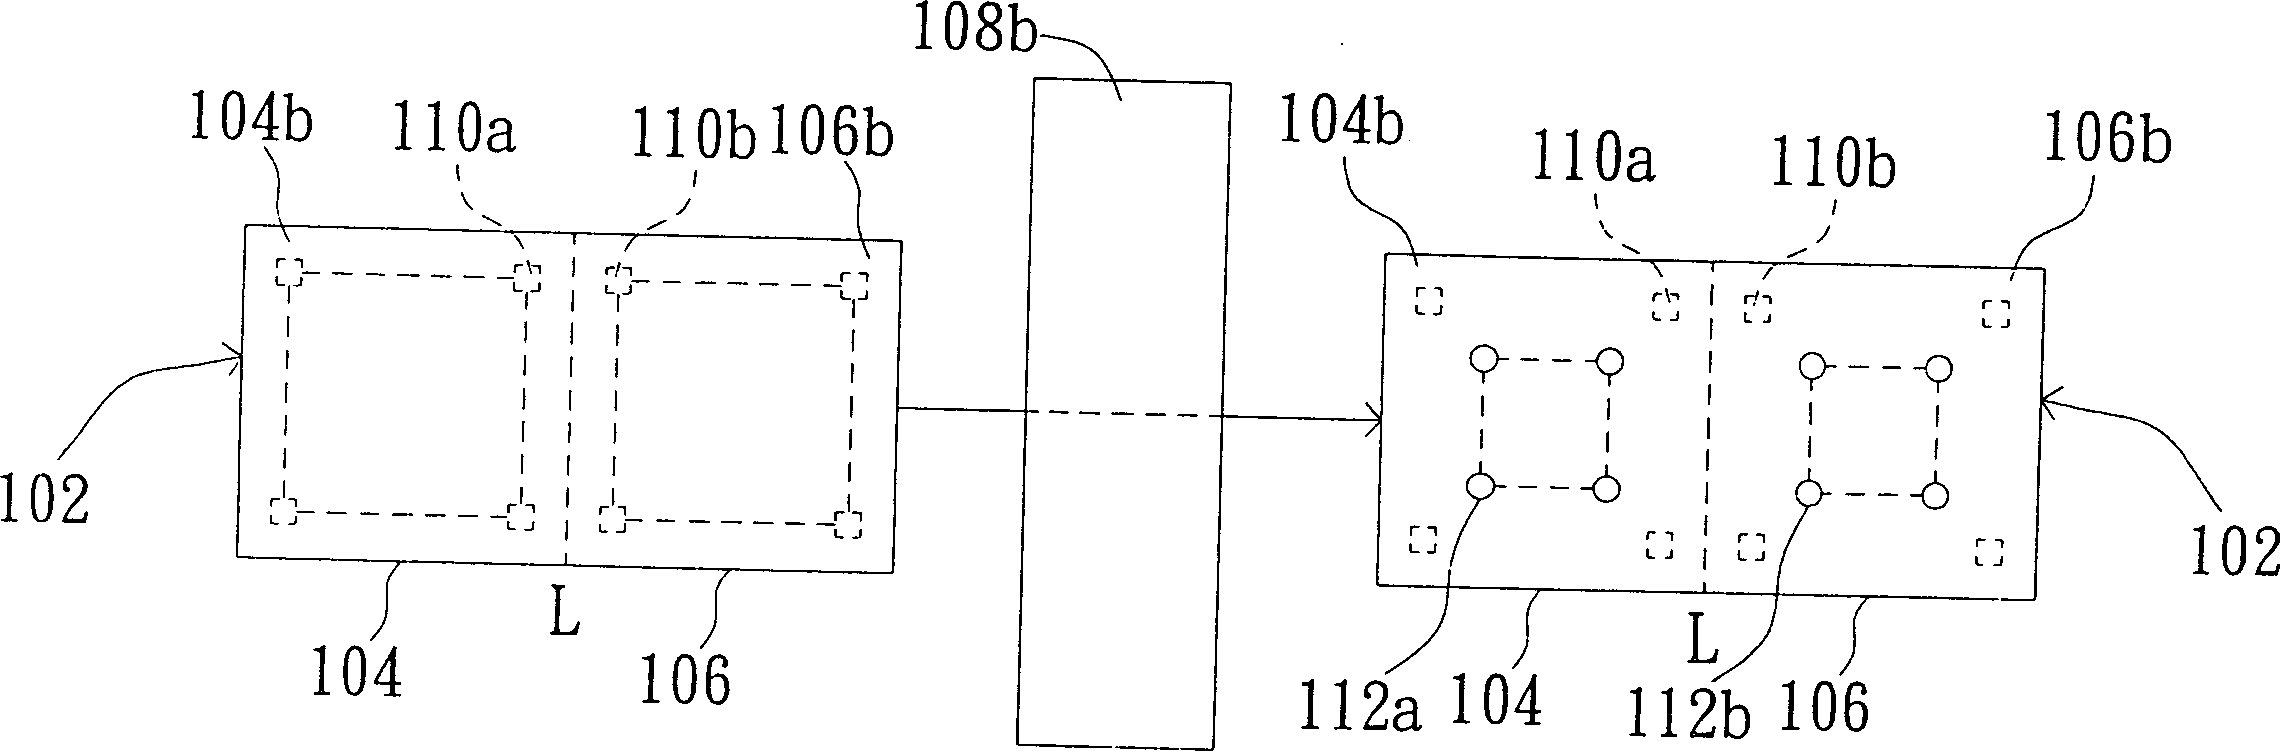 Element assembling methodfor connecting board of circuitboard